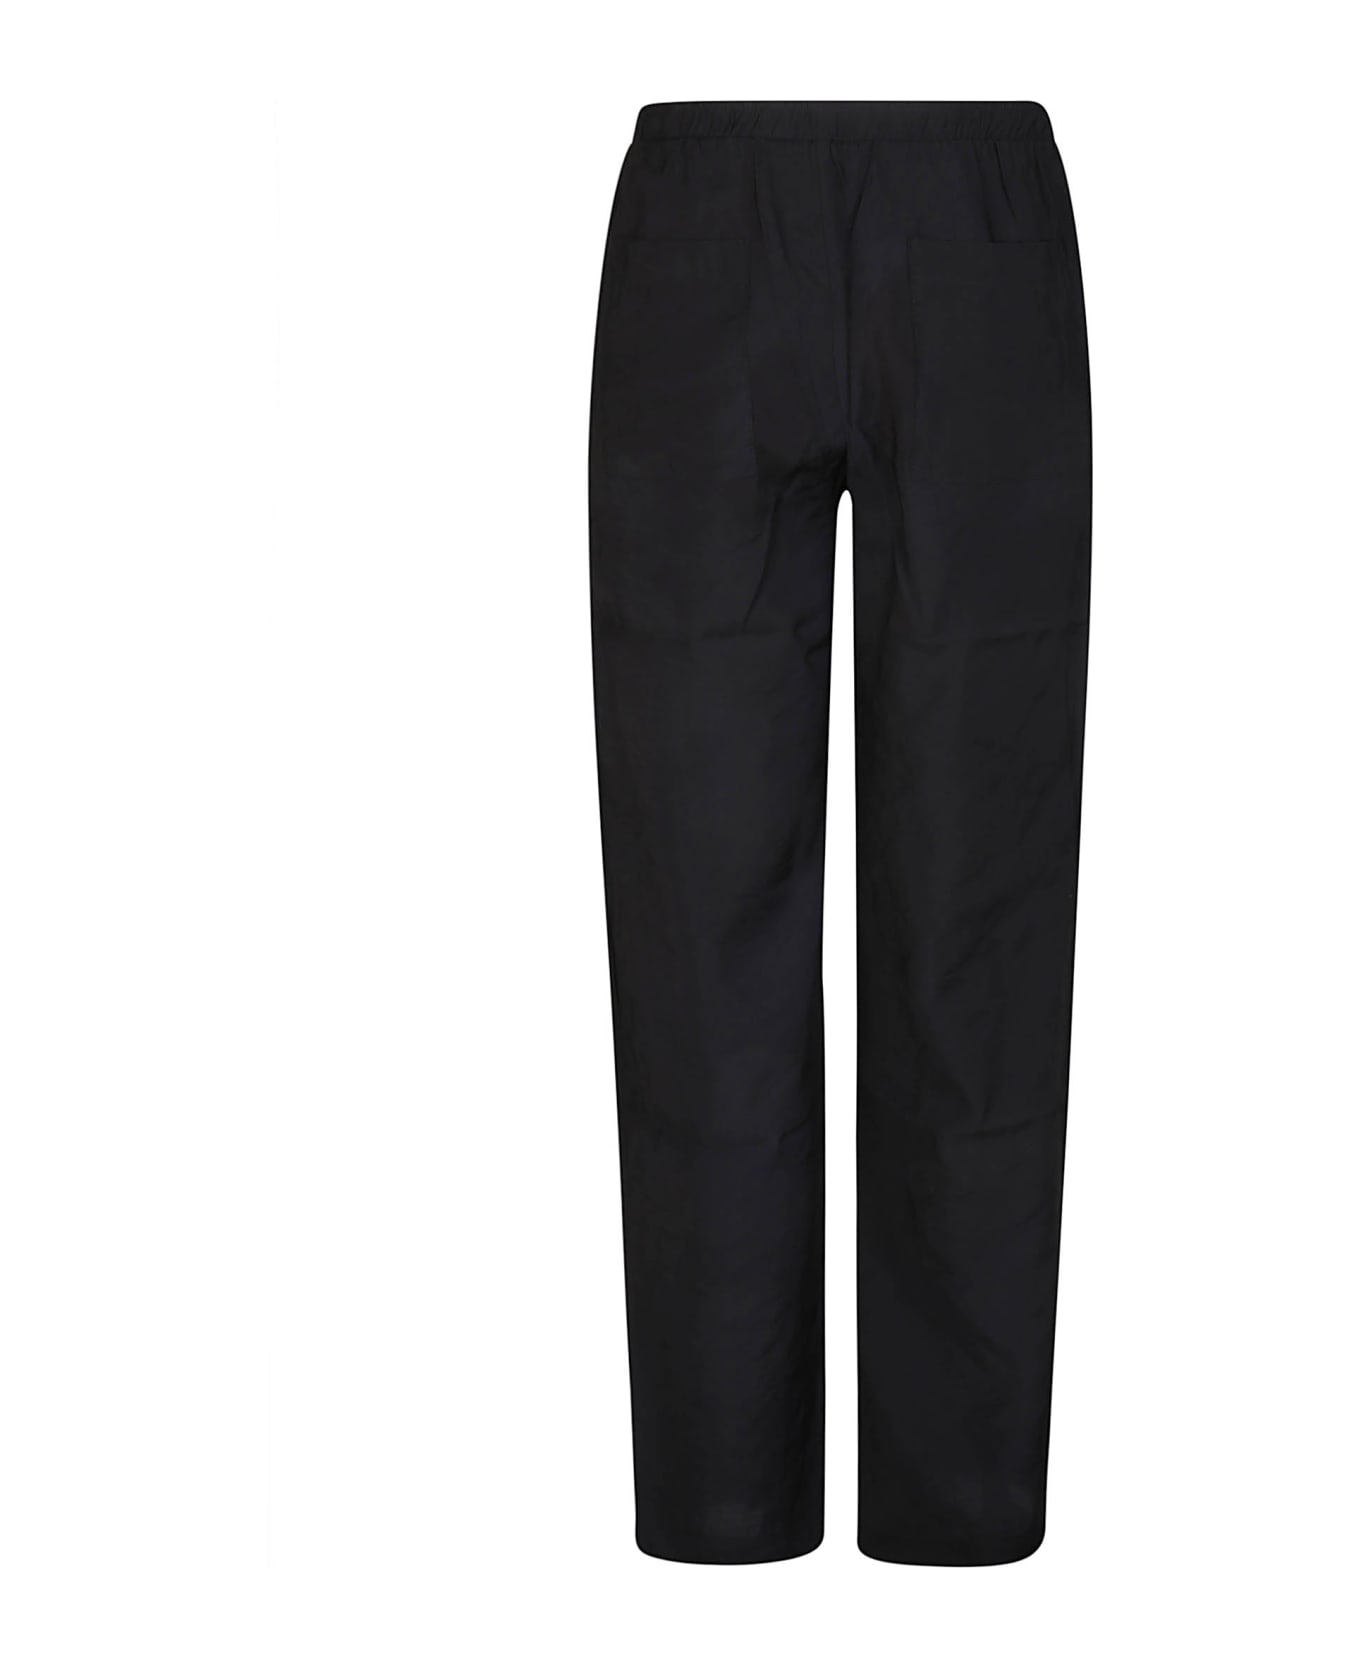 Family First Milano Soft Cupro Pant - Black